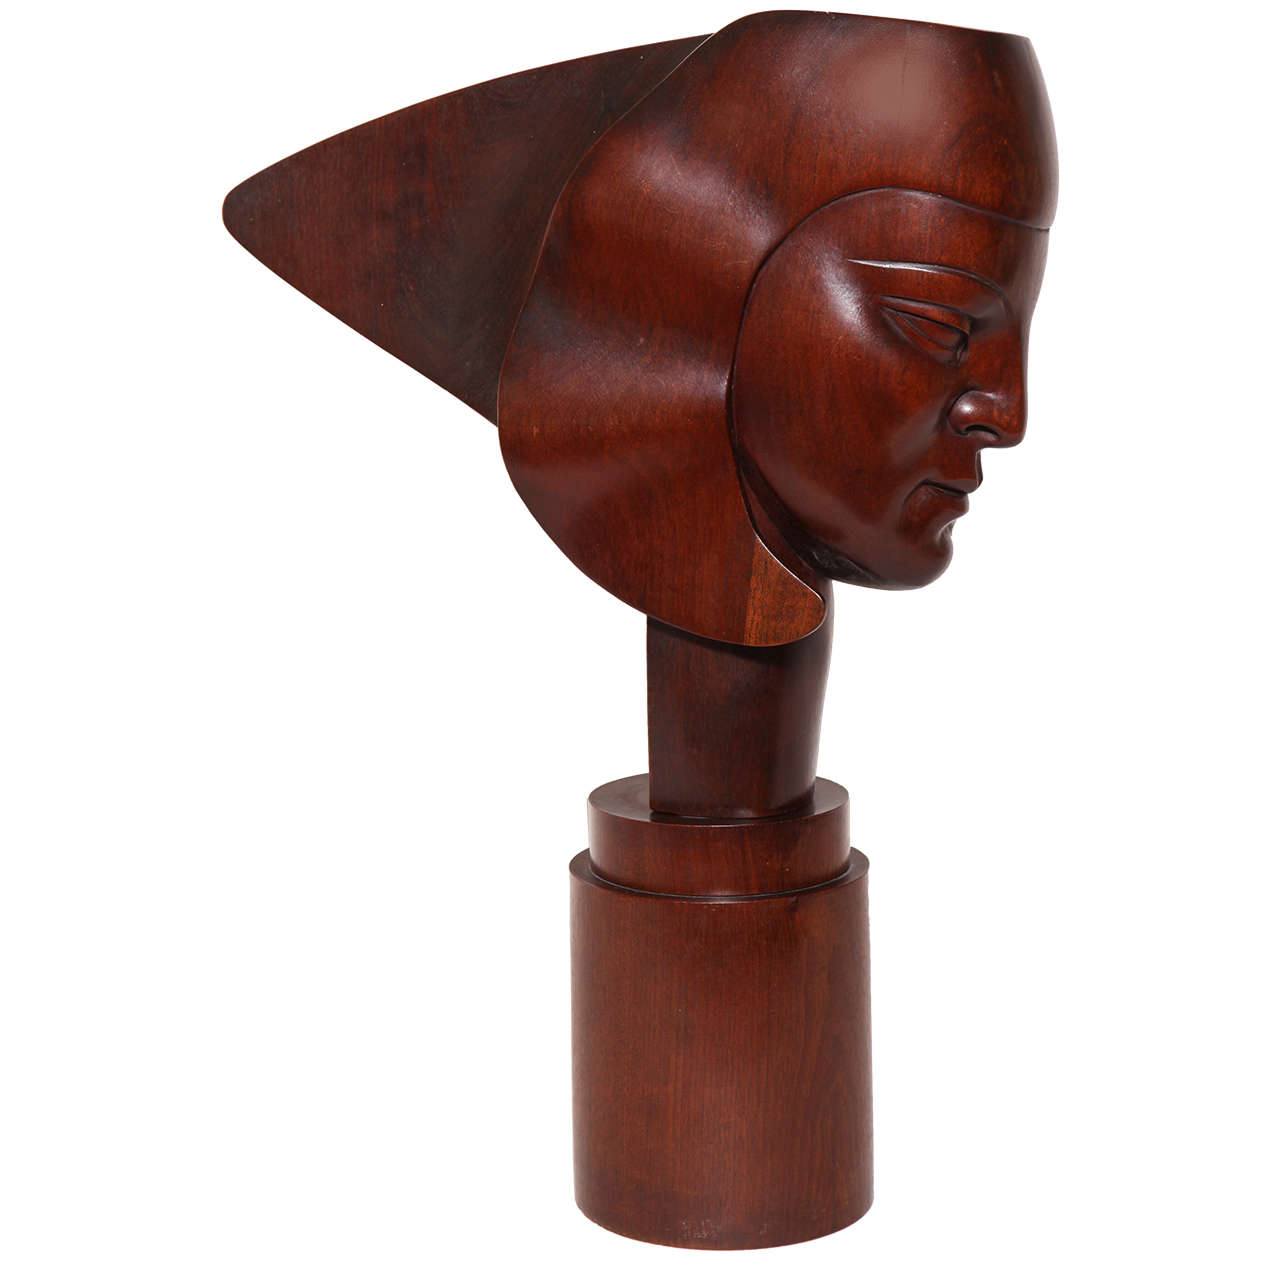 Manya Konolei Carved and Stained Wood Sculpture of Head For Sale